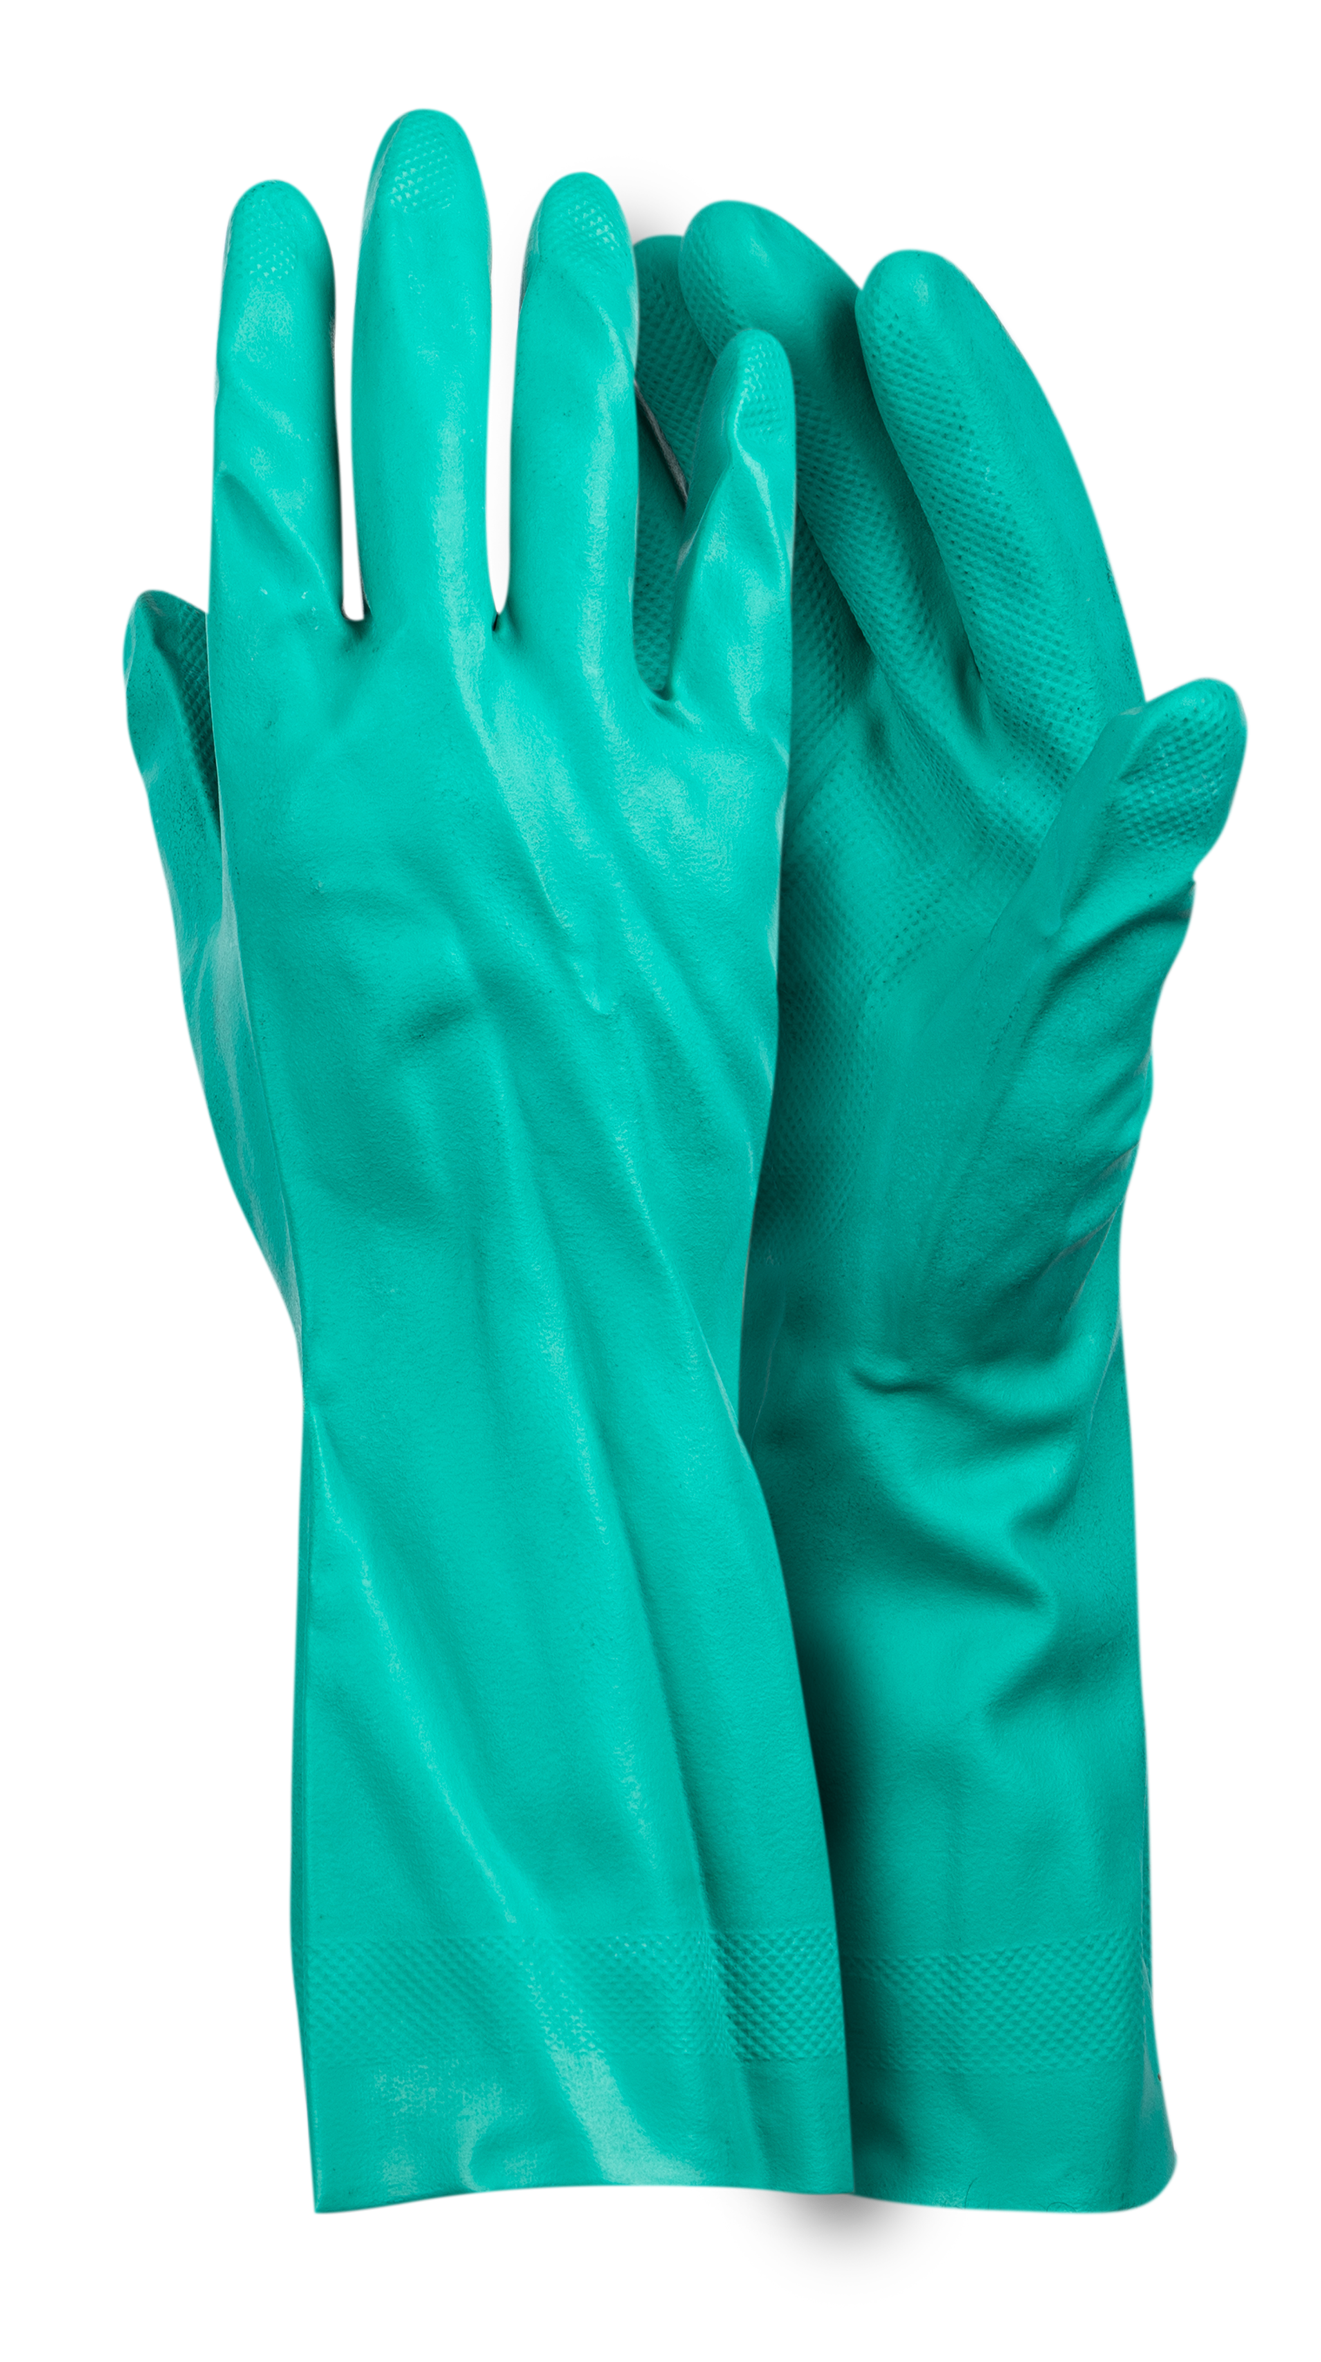 PIONEER Chemical Palm Dipped Nitrile